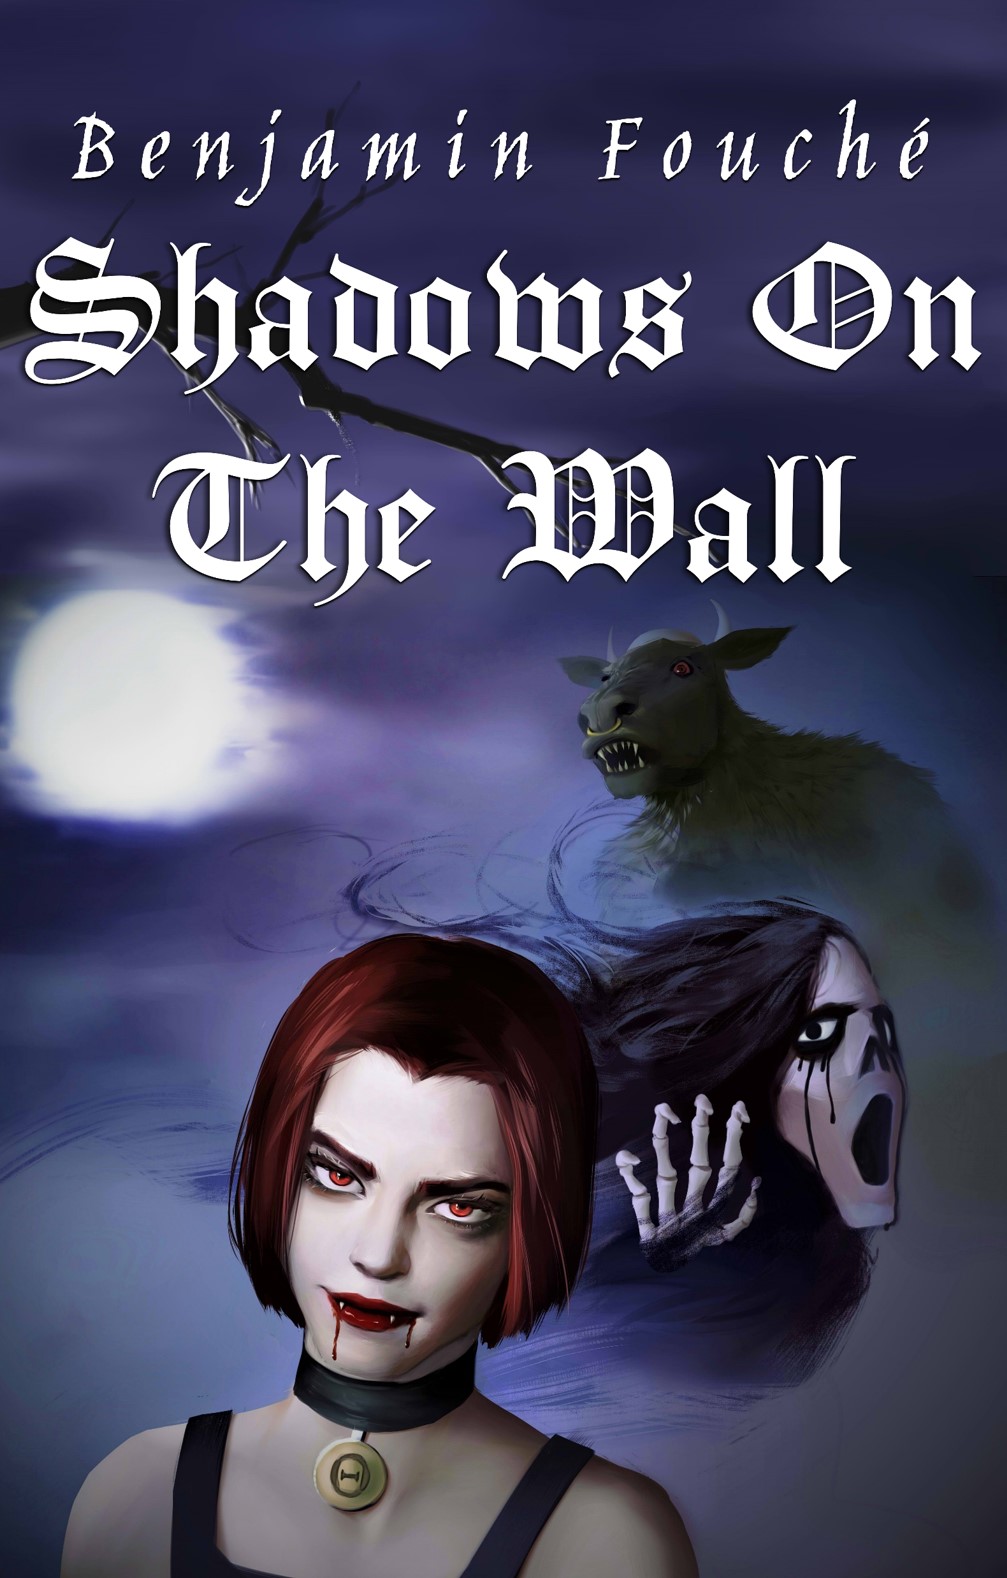 Buy "Shadows On The Wall" Now!